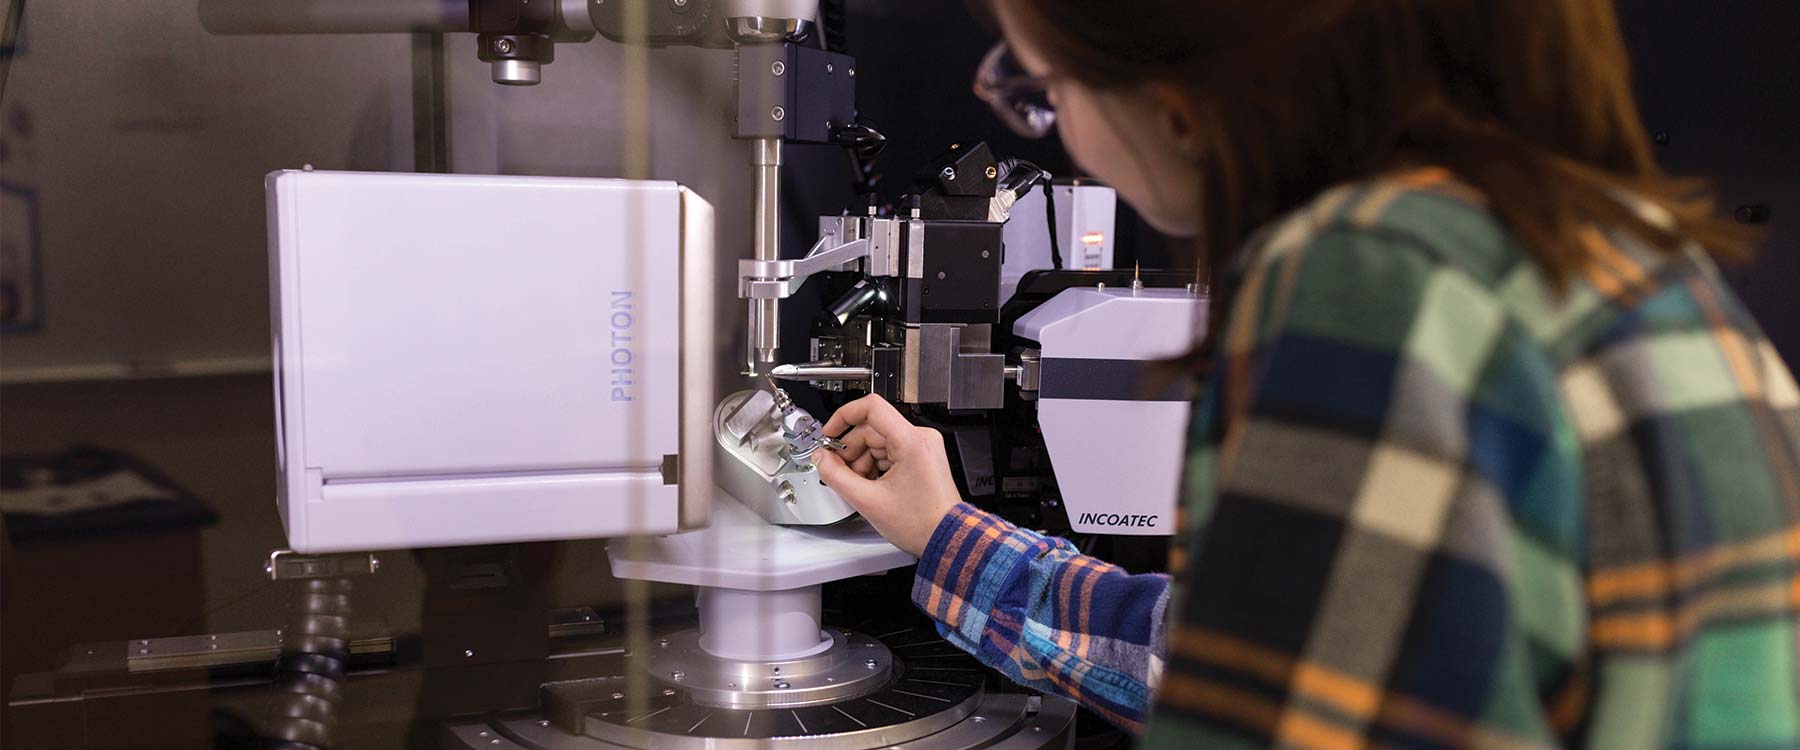 A person examines the diffractometer at the Summer Crystallographic Institute